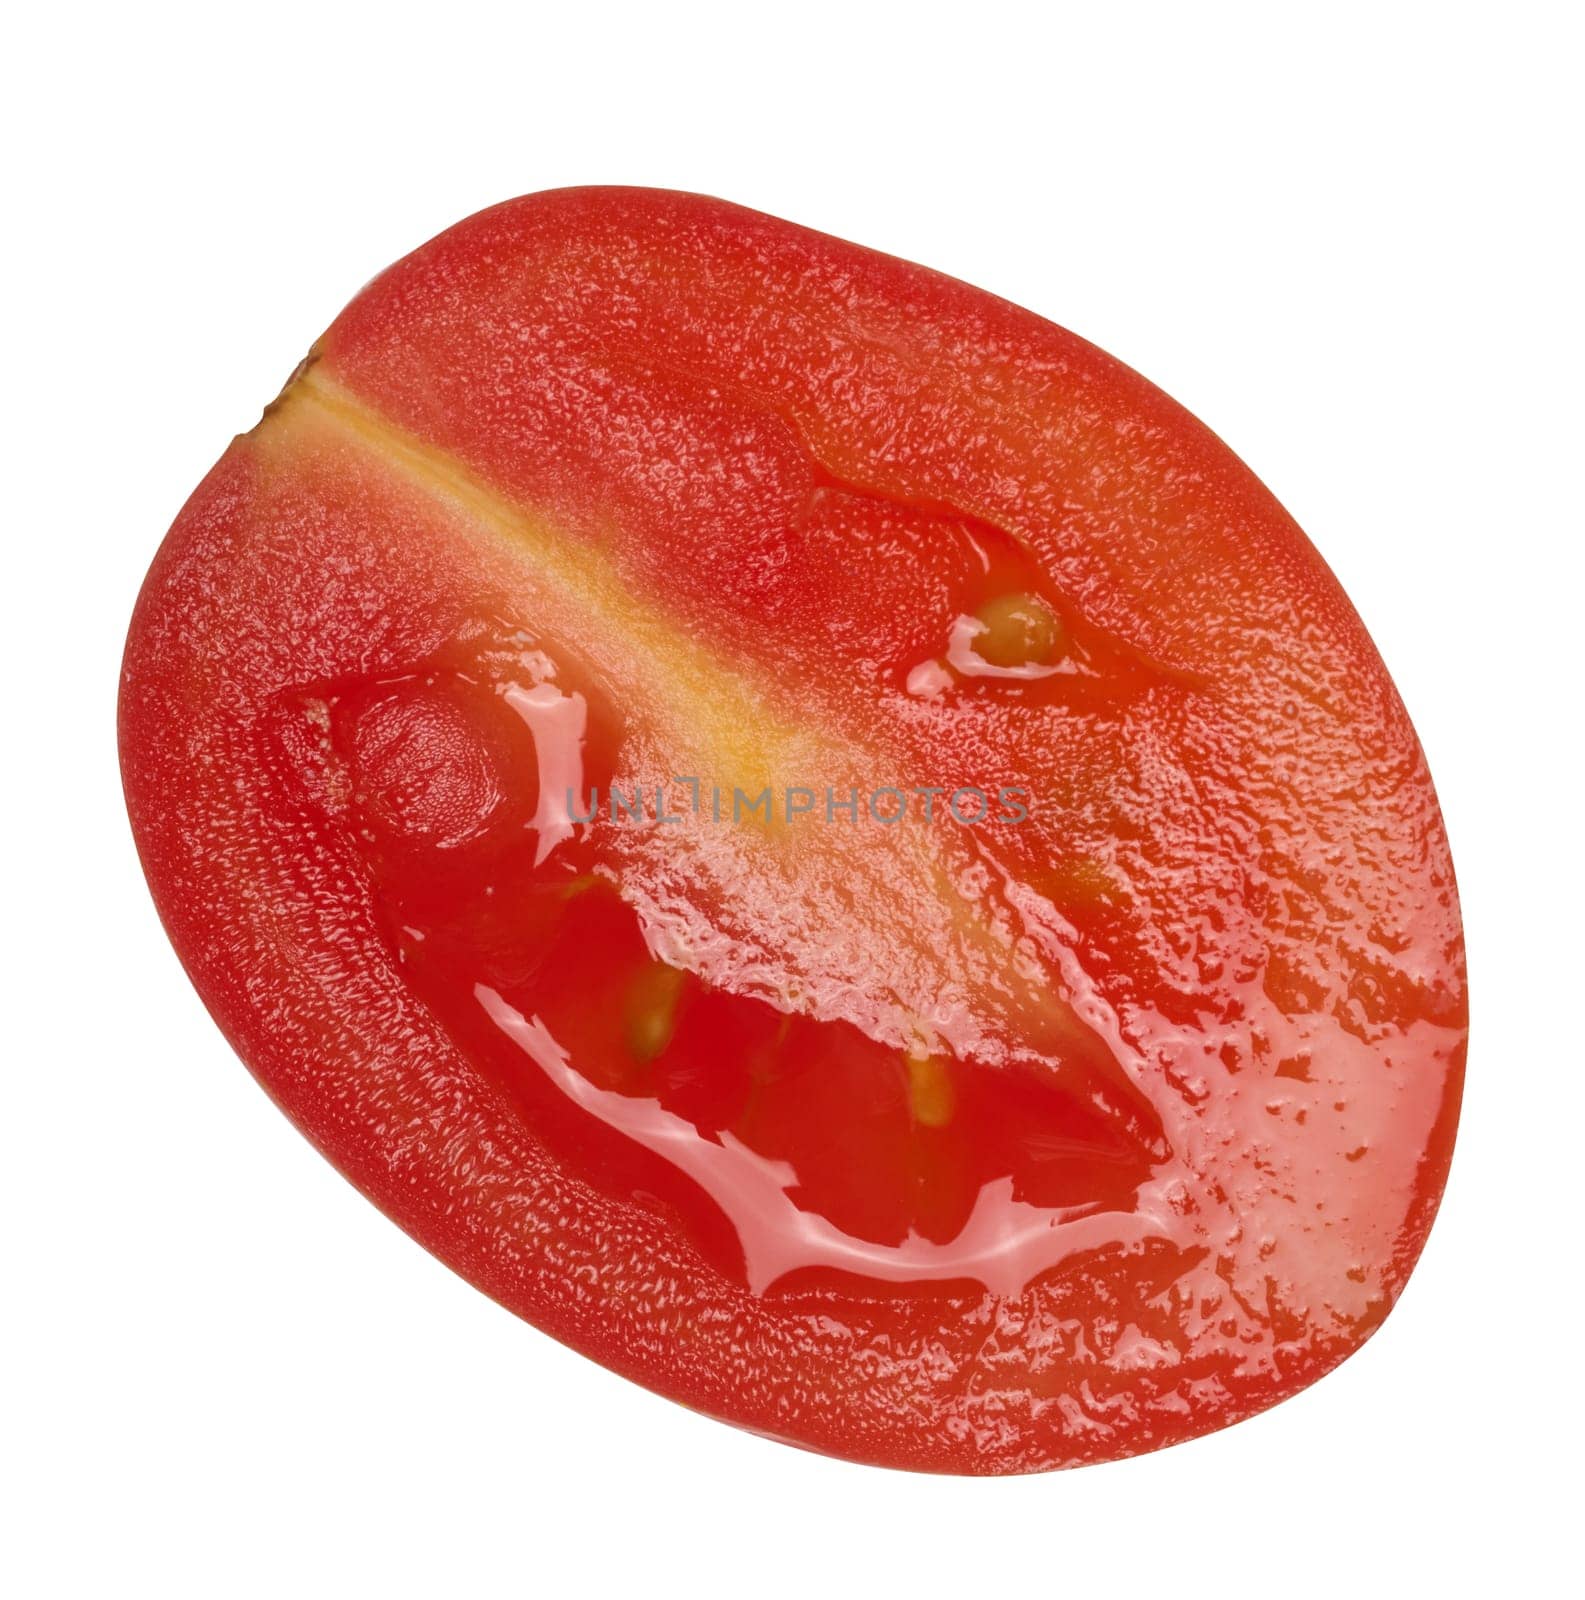 Half of a ripe cherry tomato on an isolated background, top view